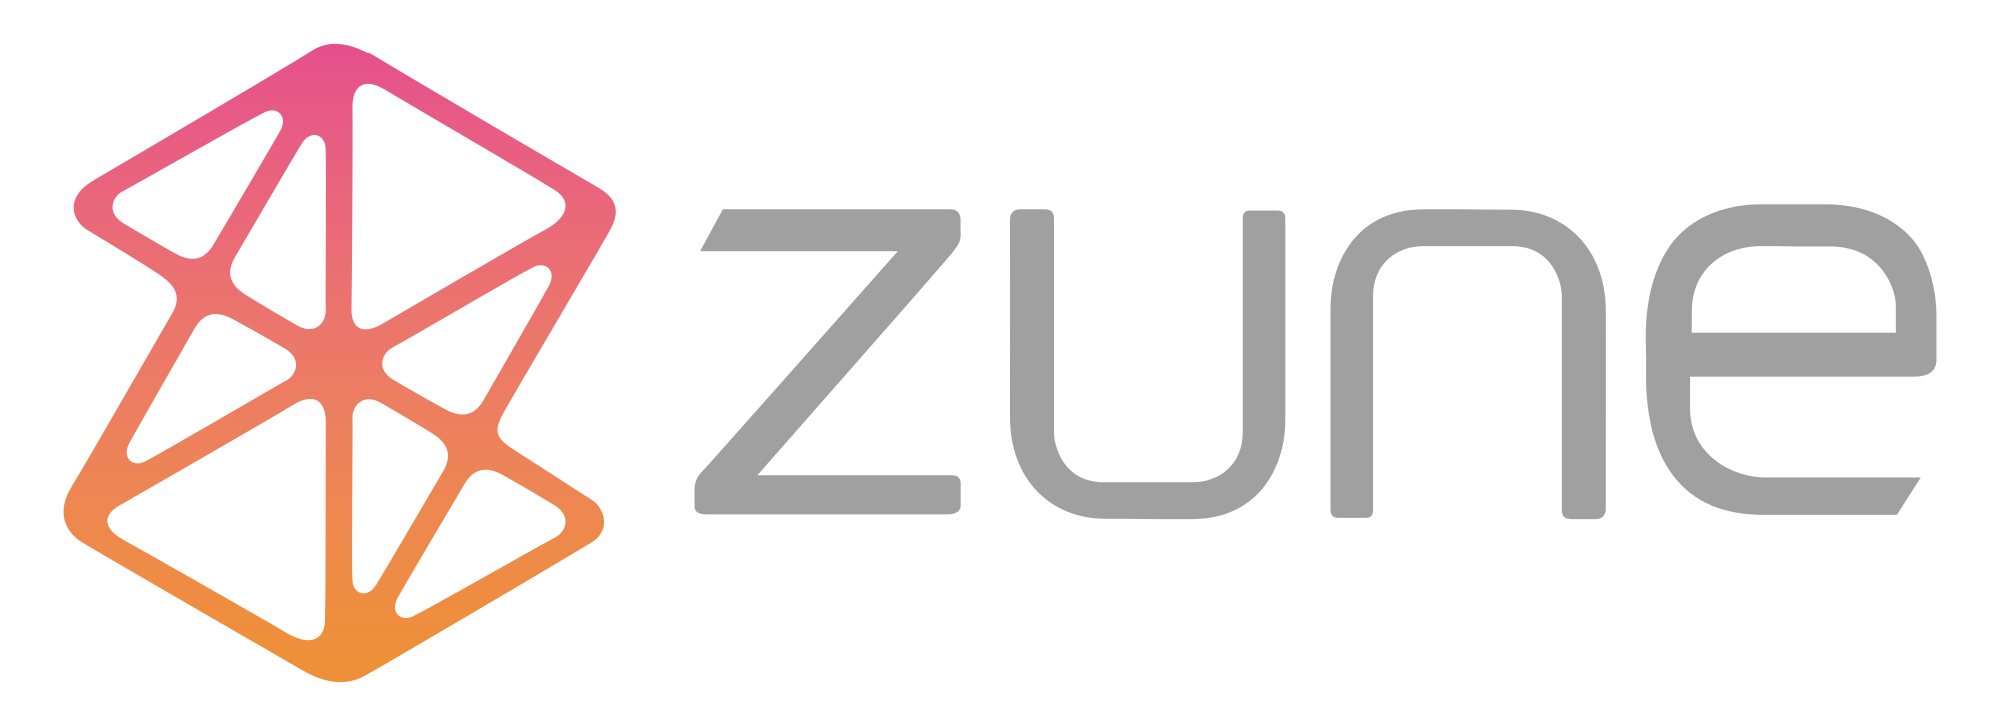 Microsoft Have Closed Their Music Service Zune